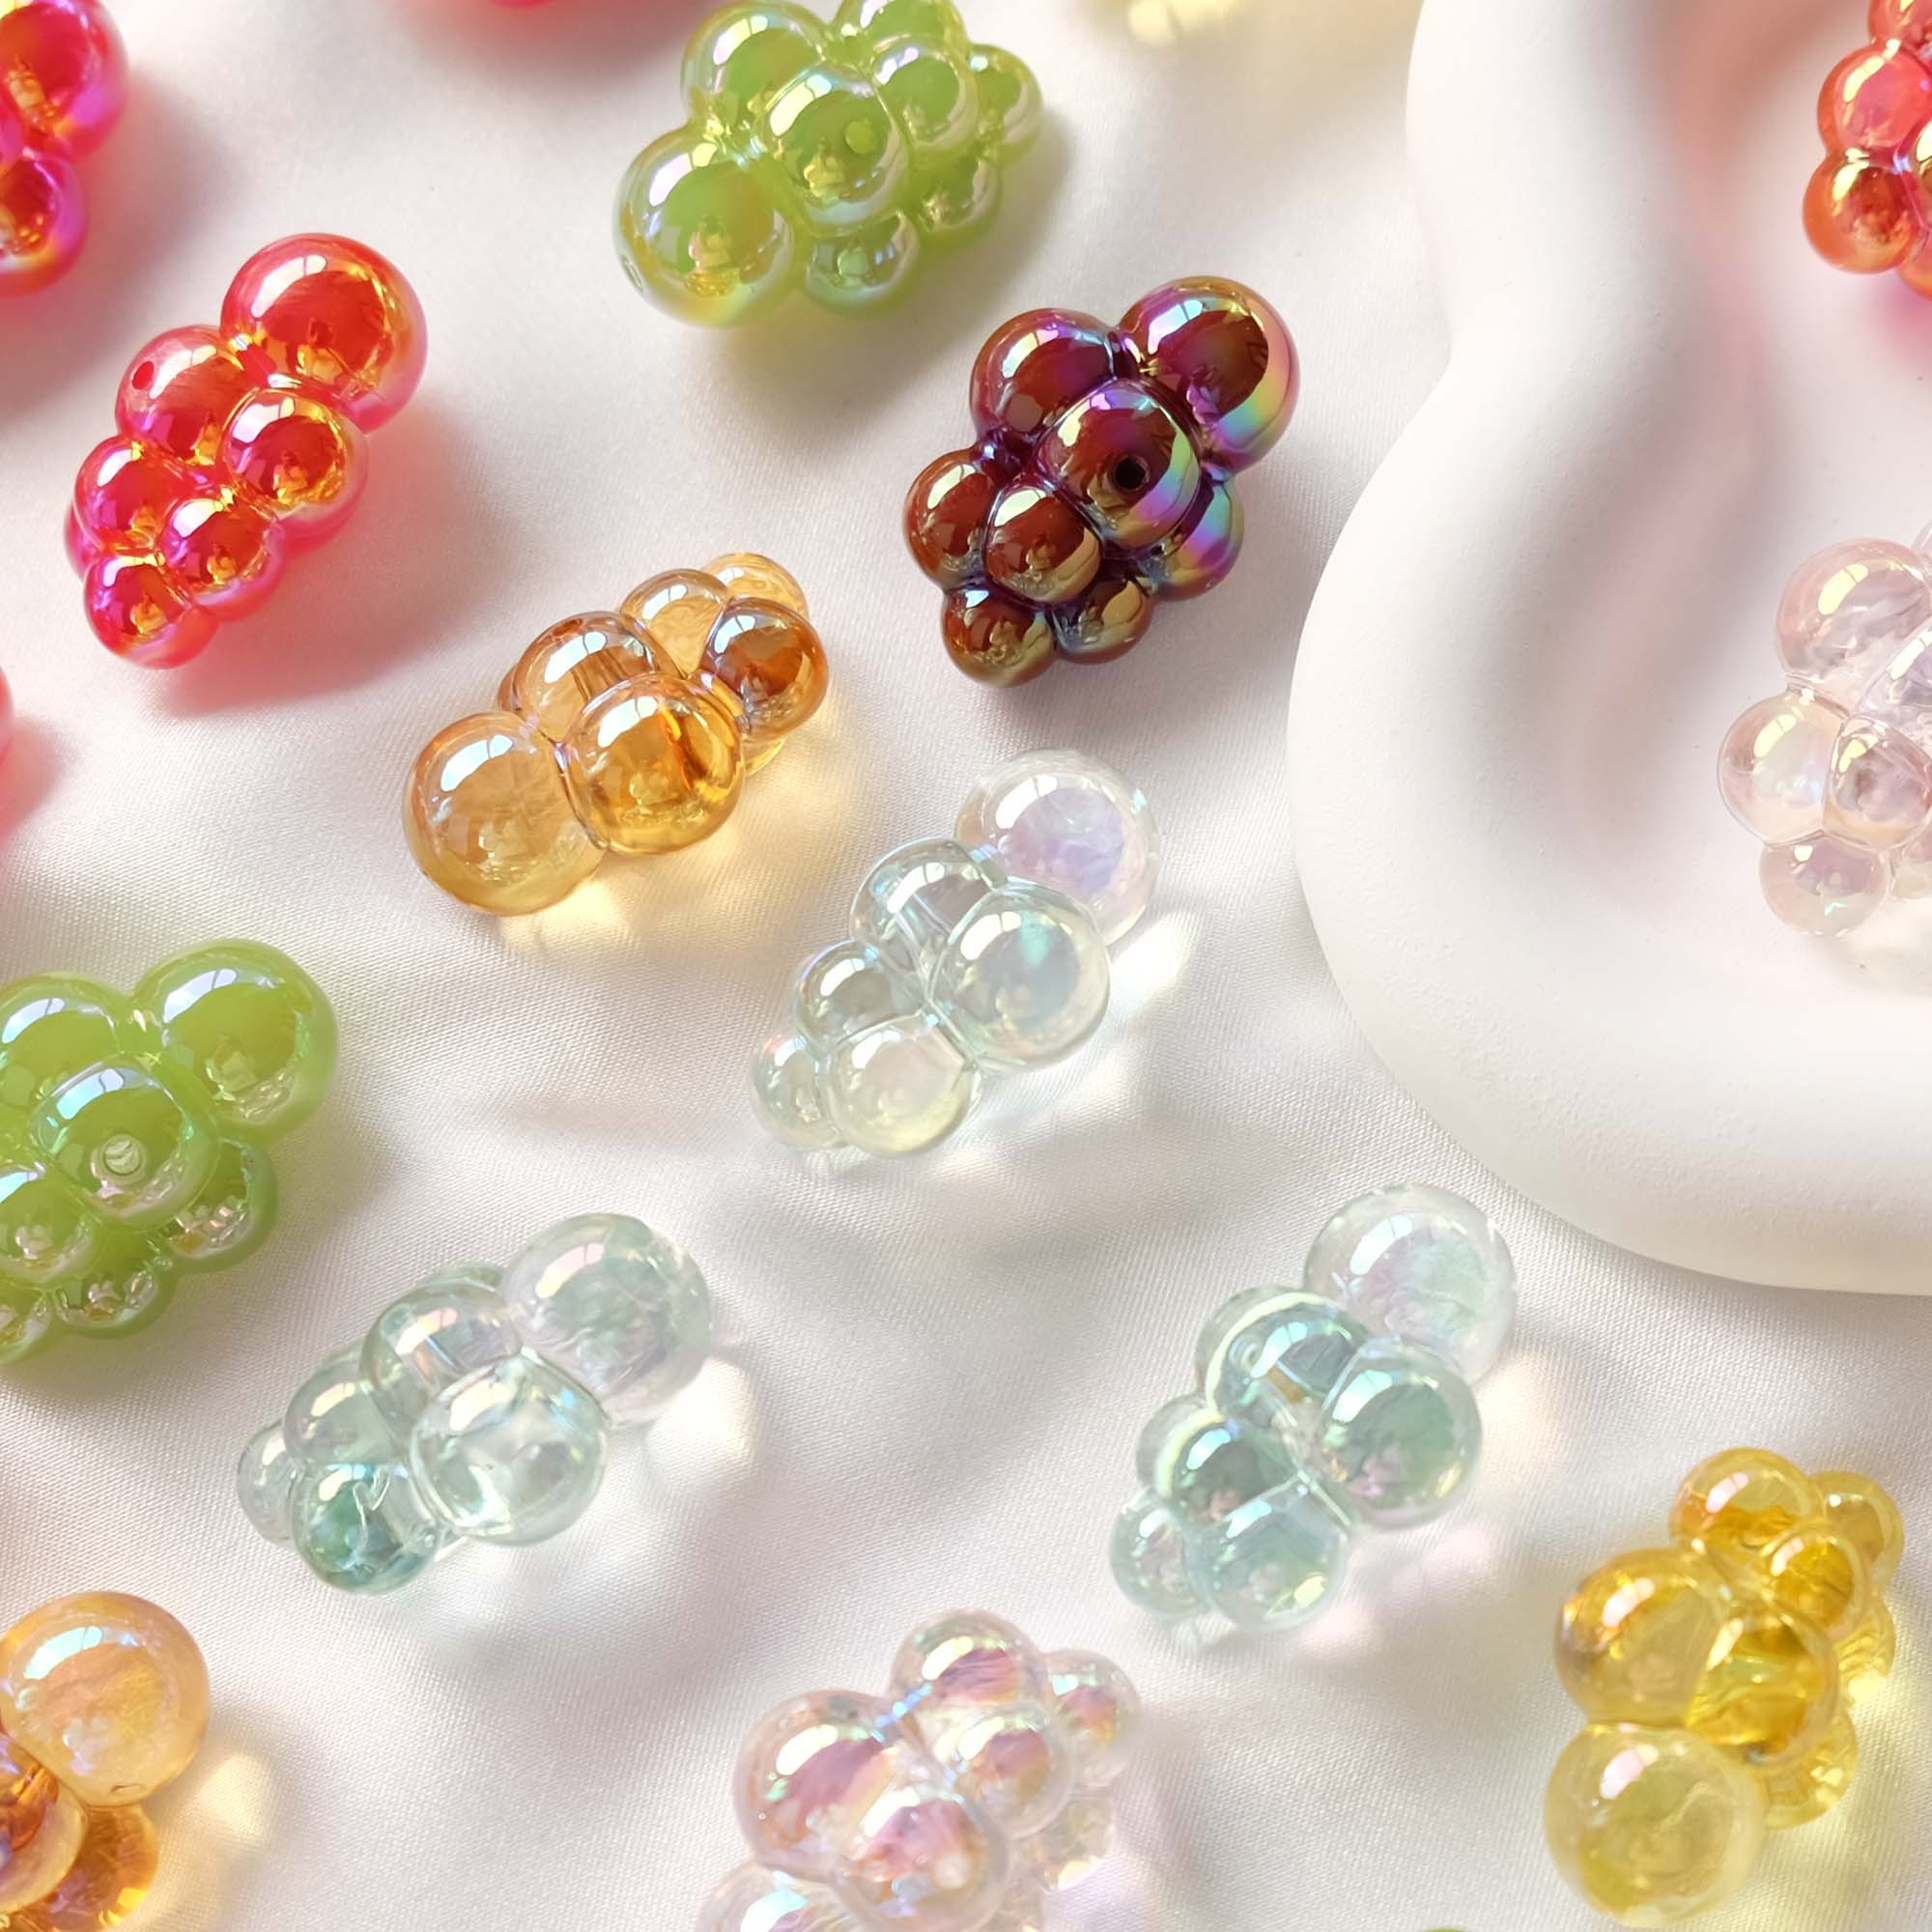 Cute Solid Color Glitter Gummy Bear Beads (10 x 16mm)